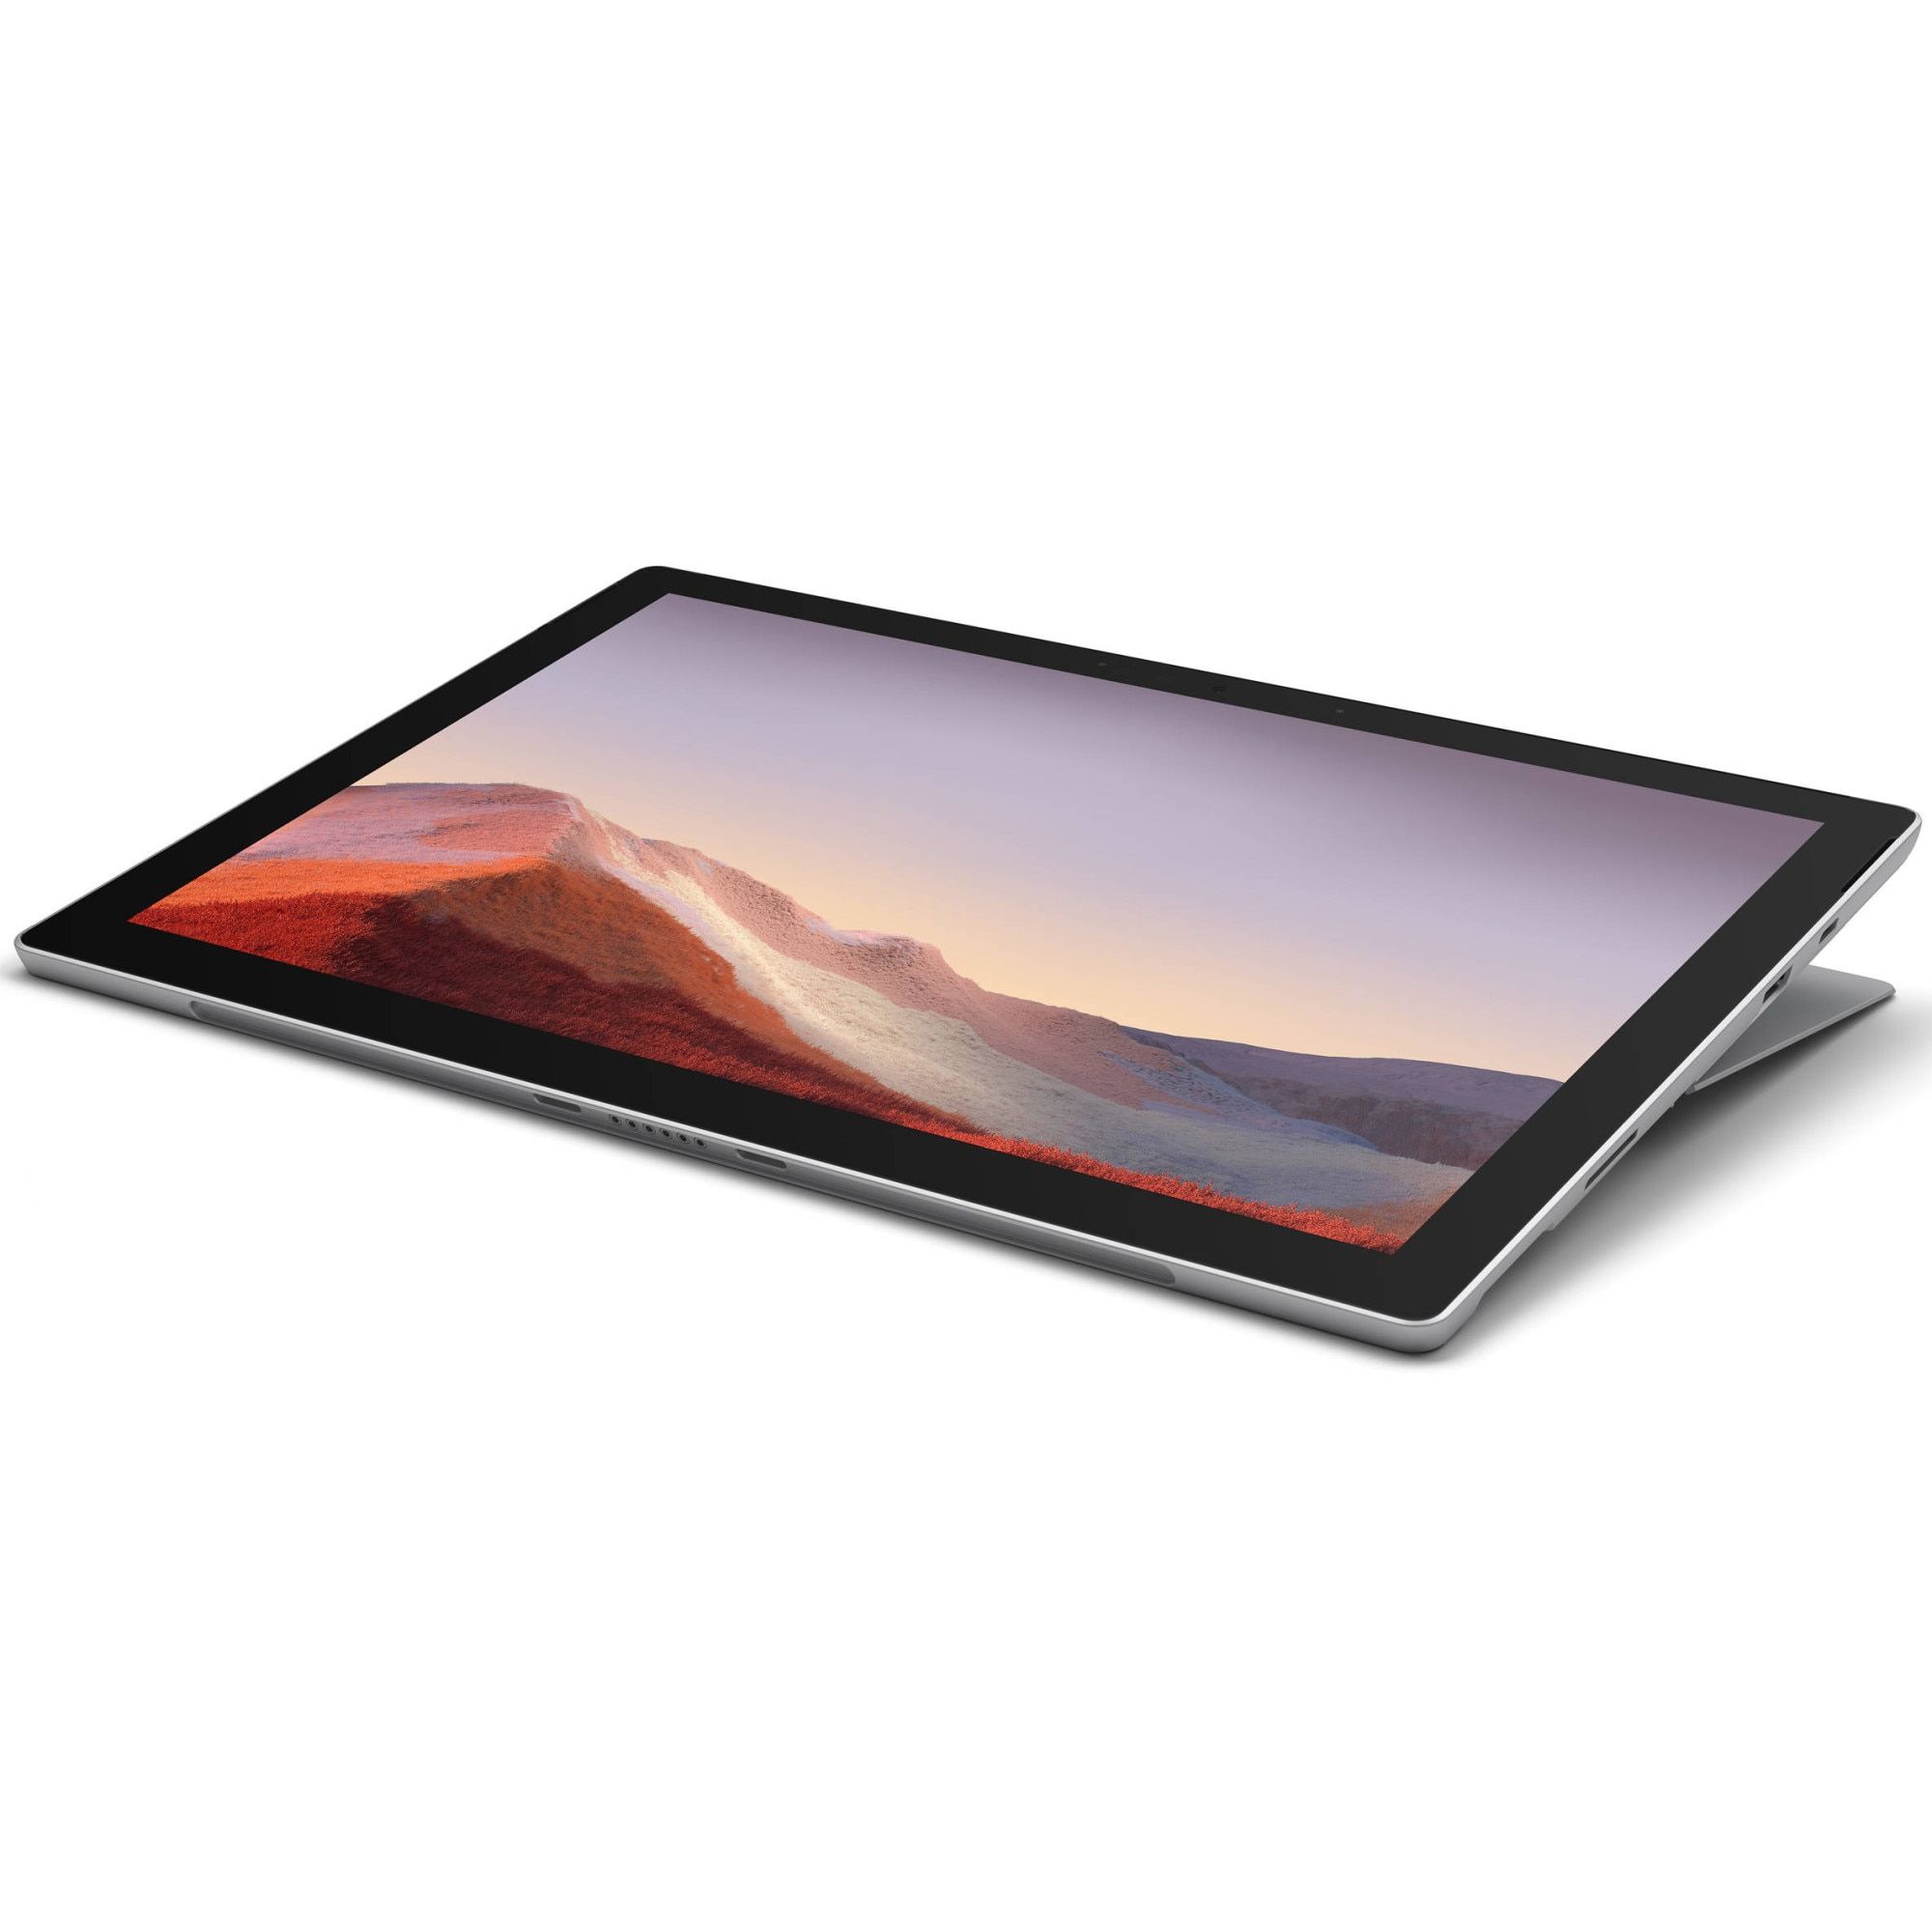 MICROSOFT Surface Pro7 2-in-1 Laptop i5-1035G4 12.3inch Touch PixelSense 8GB DDR4 256SSD Windows Hello 802.11ac Win10H P-rebusbish_7